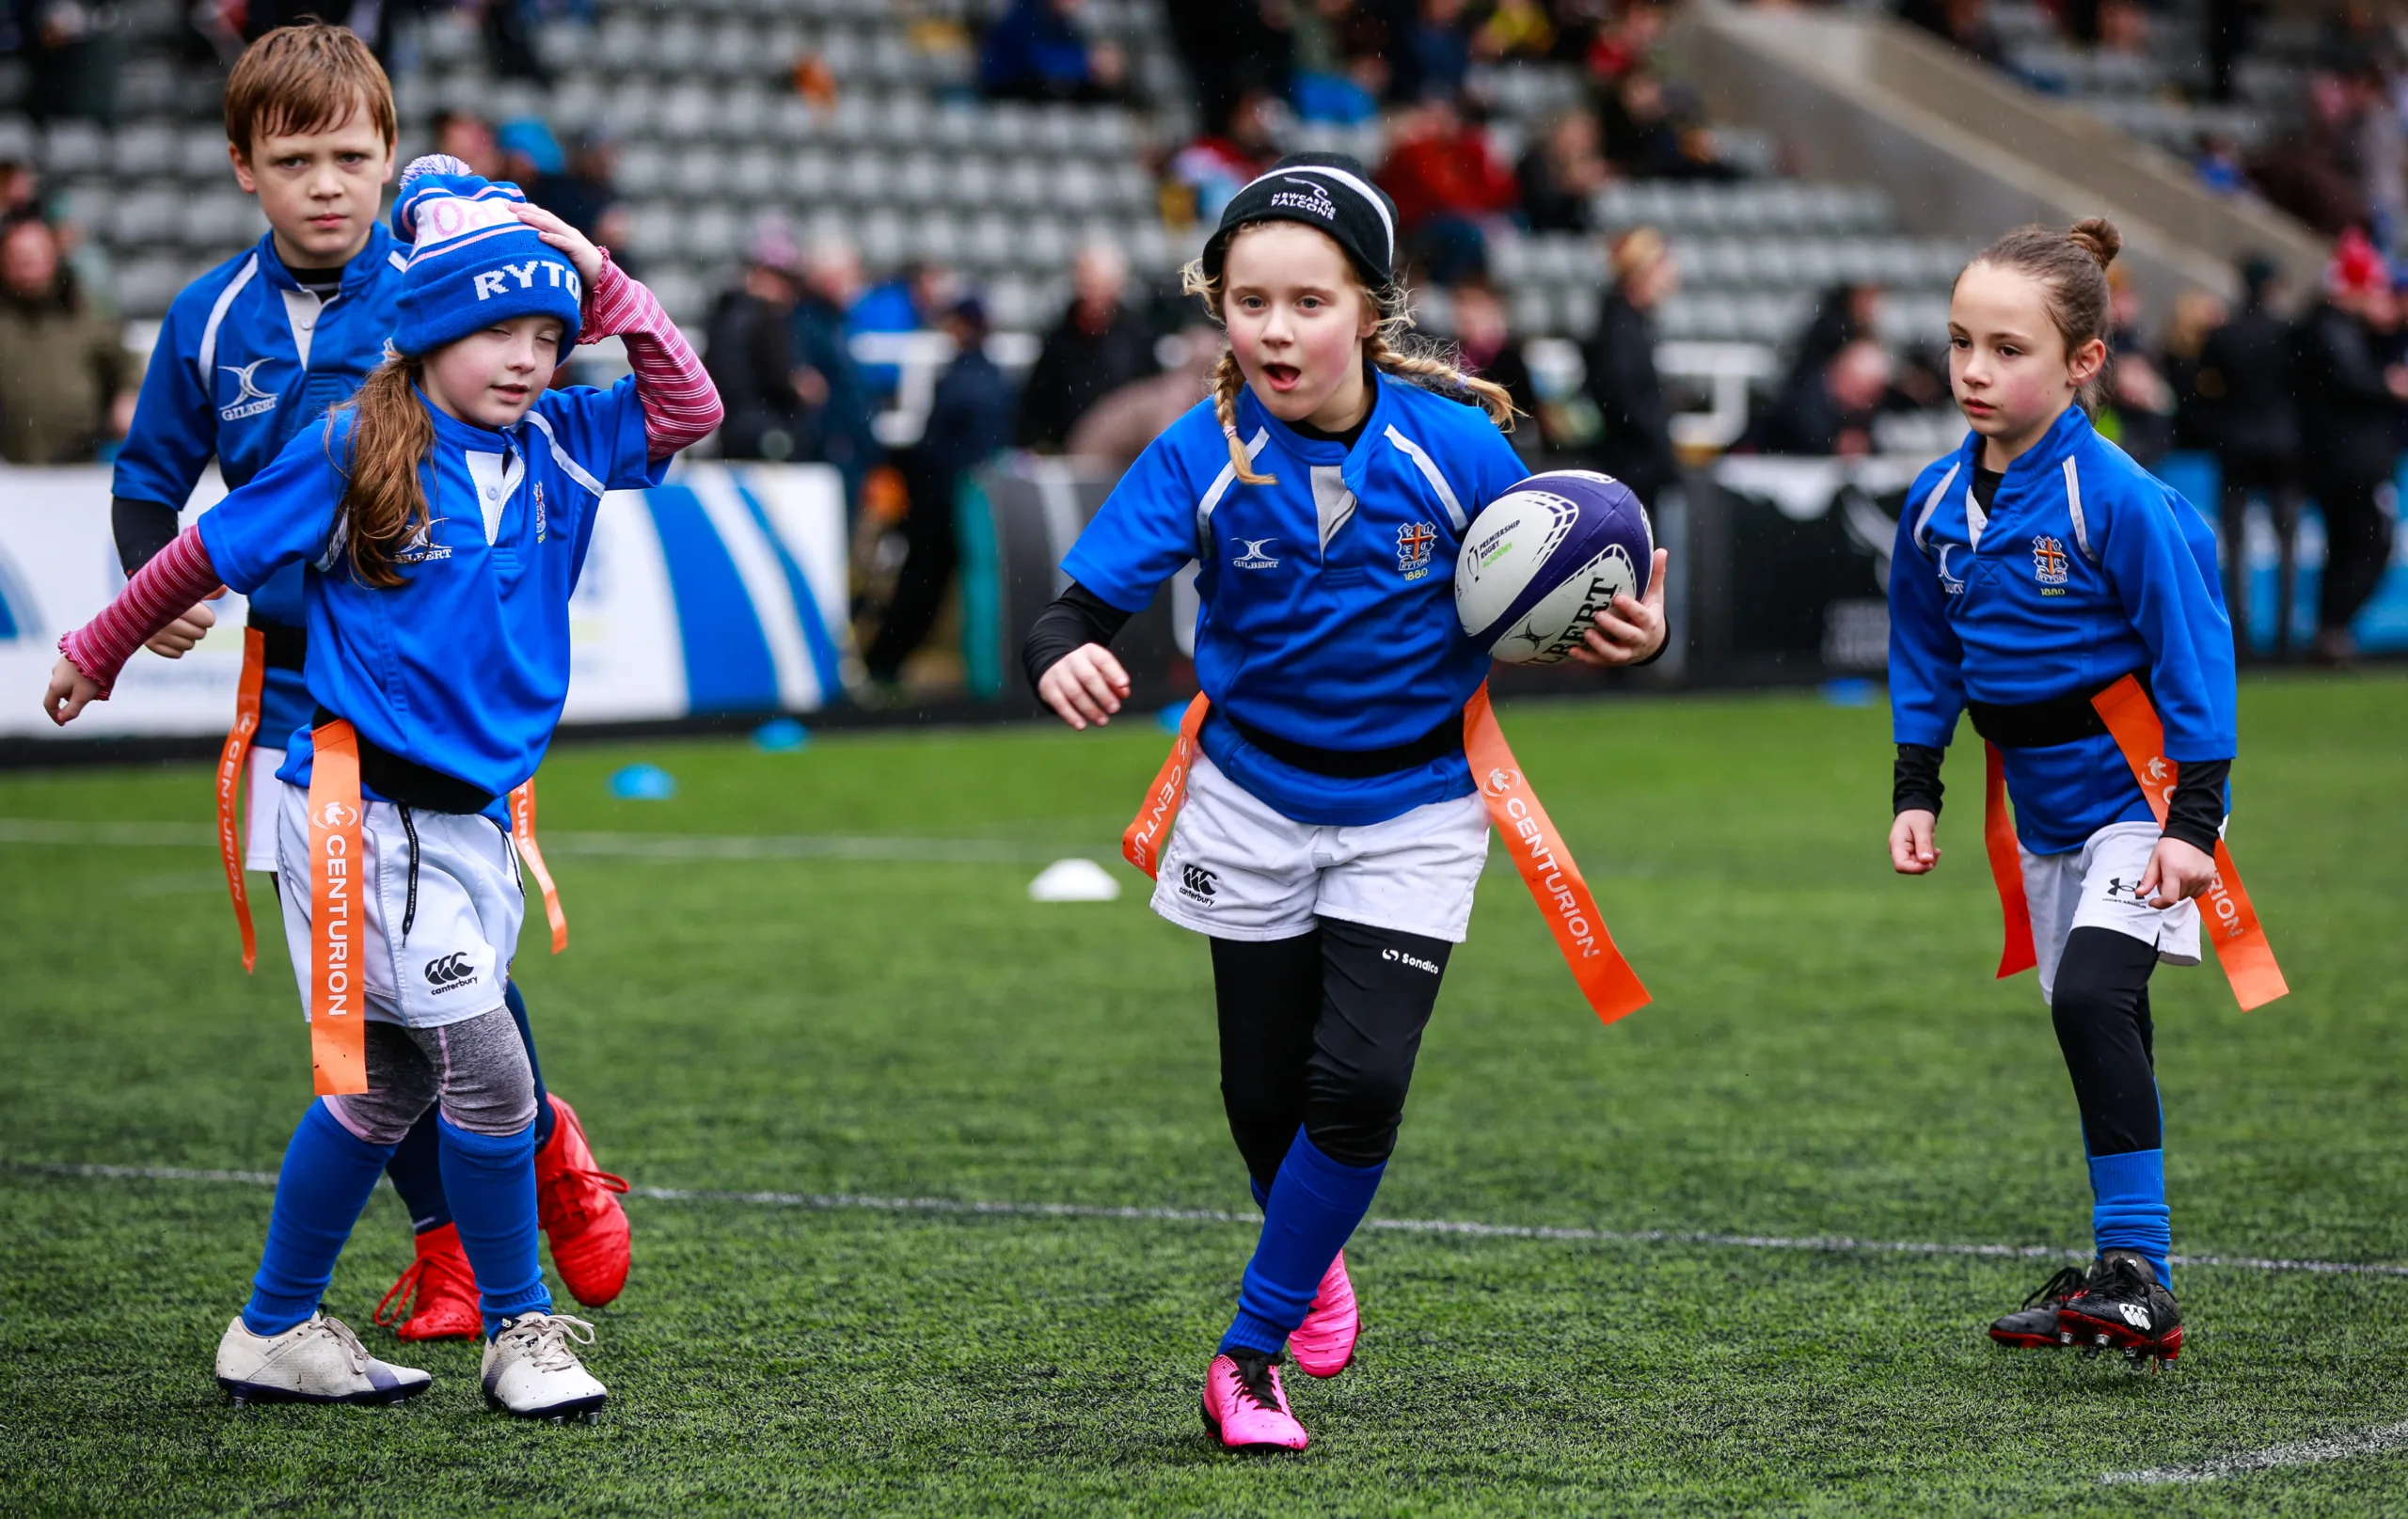 A brilliant day for grassroots rugby